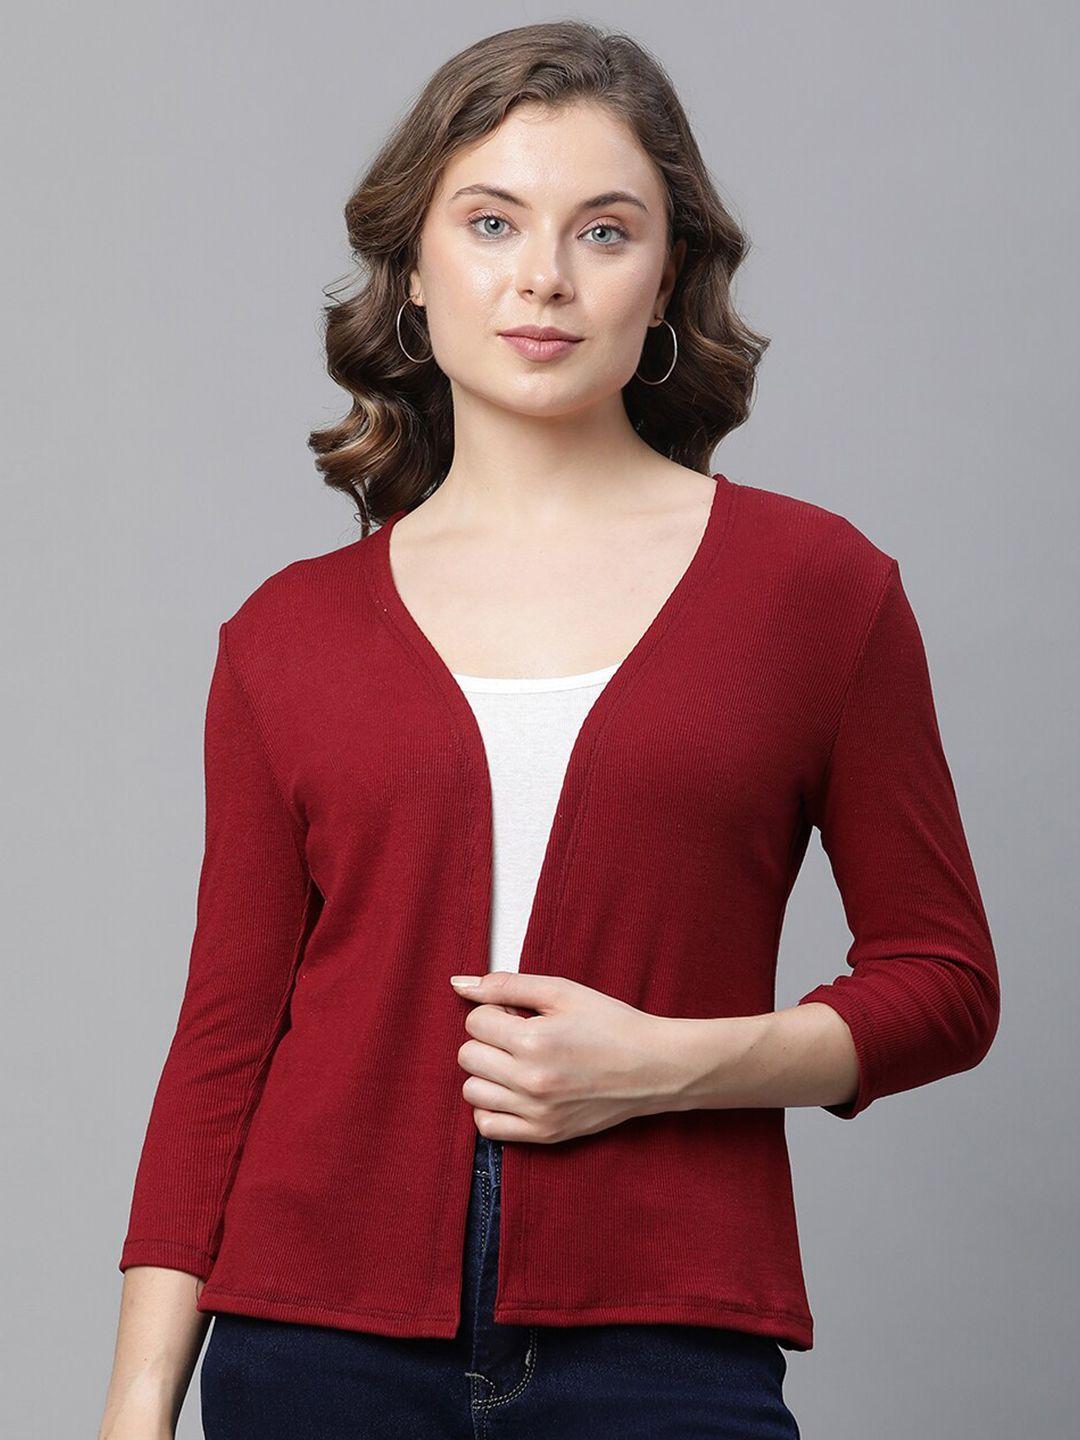 unaone three-quarter sleeves cotton open front shrug